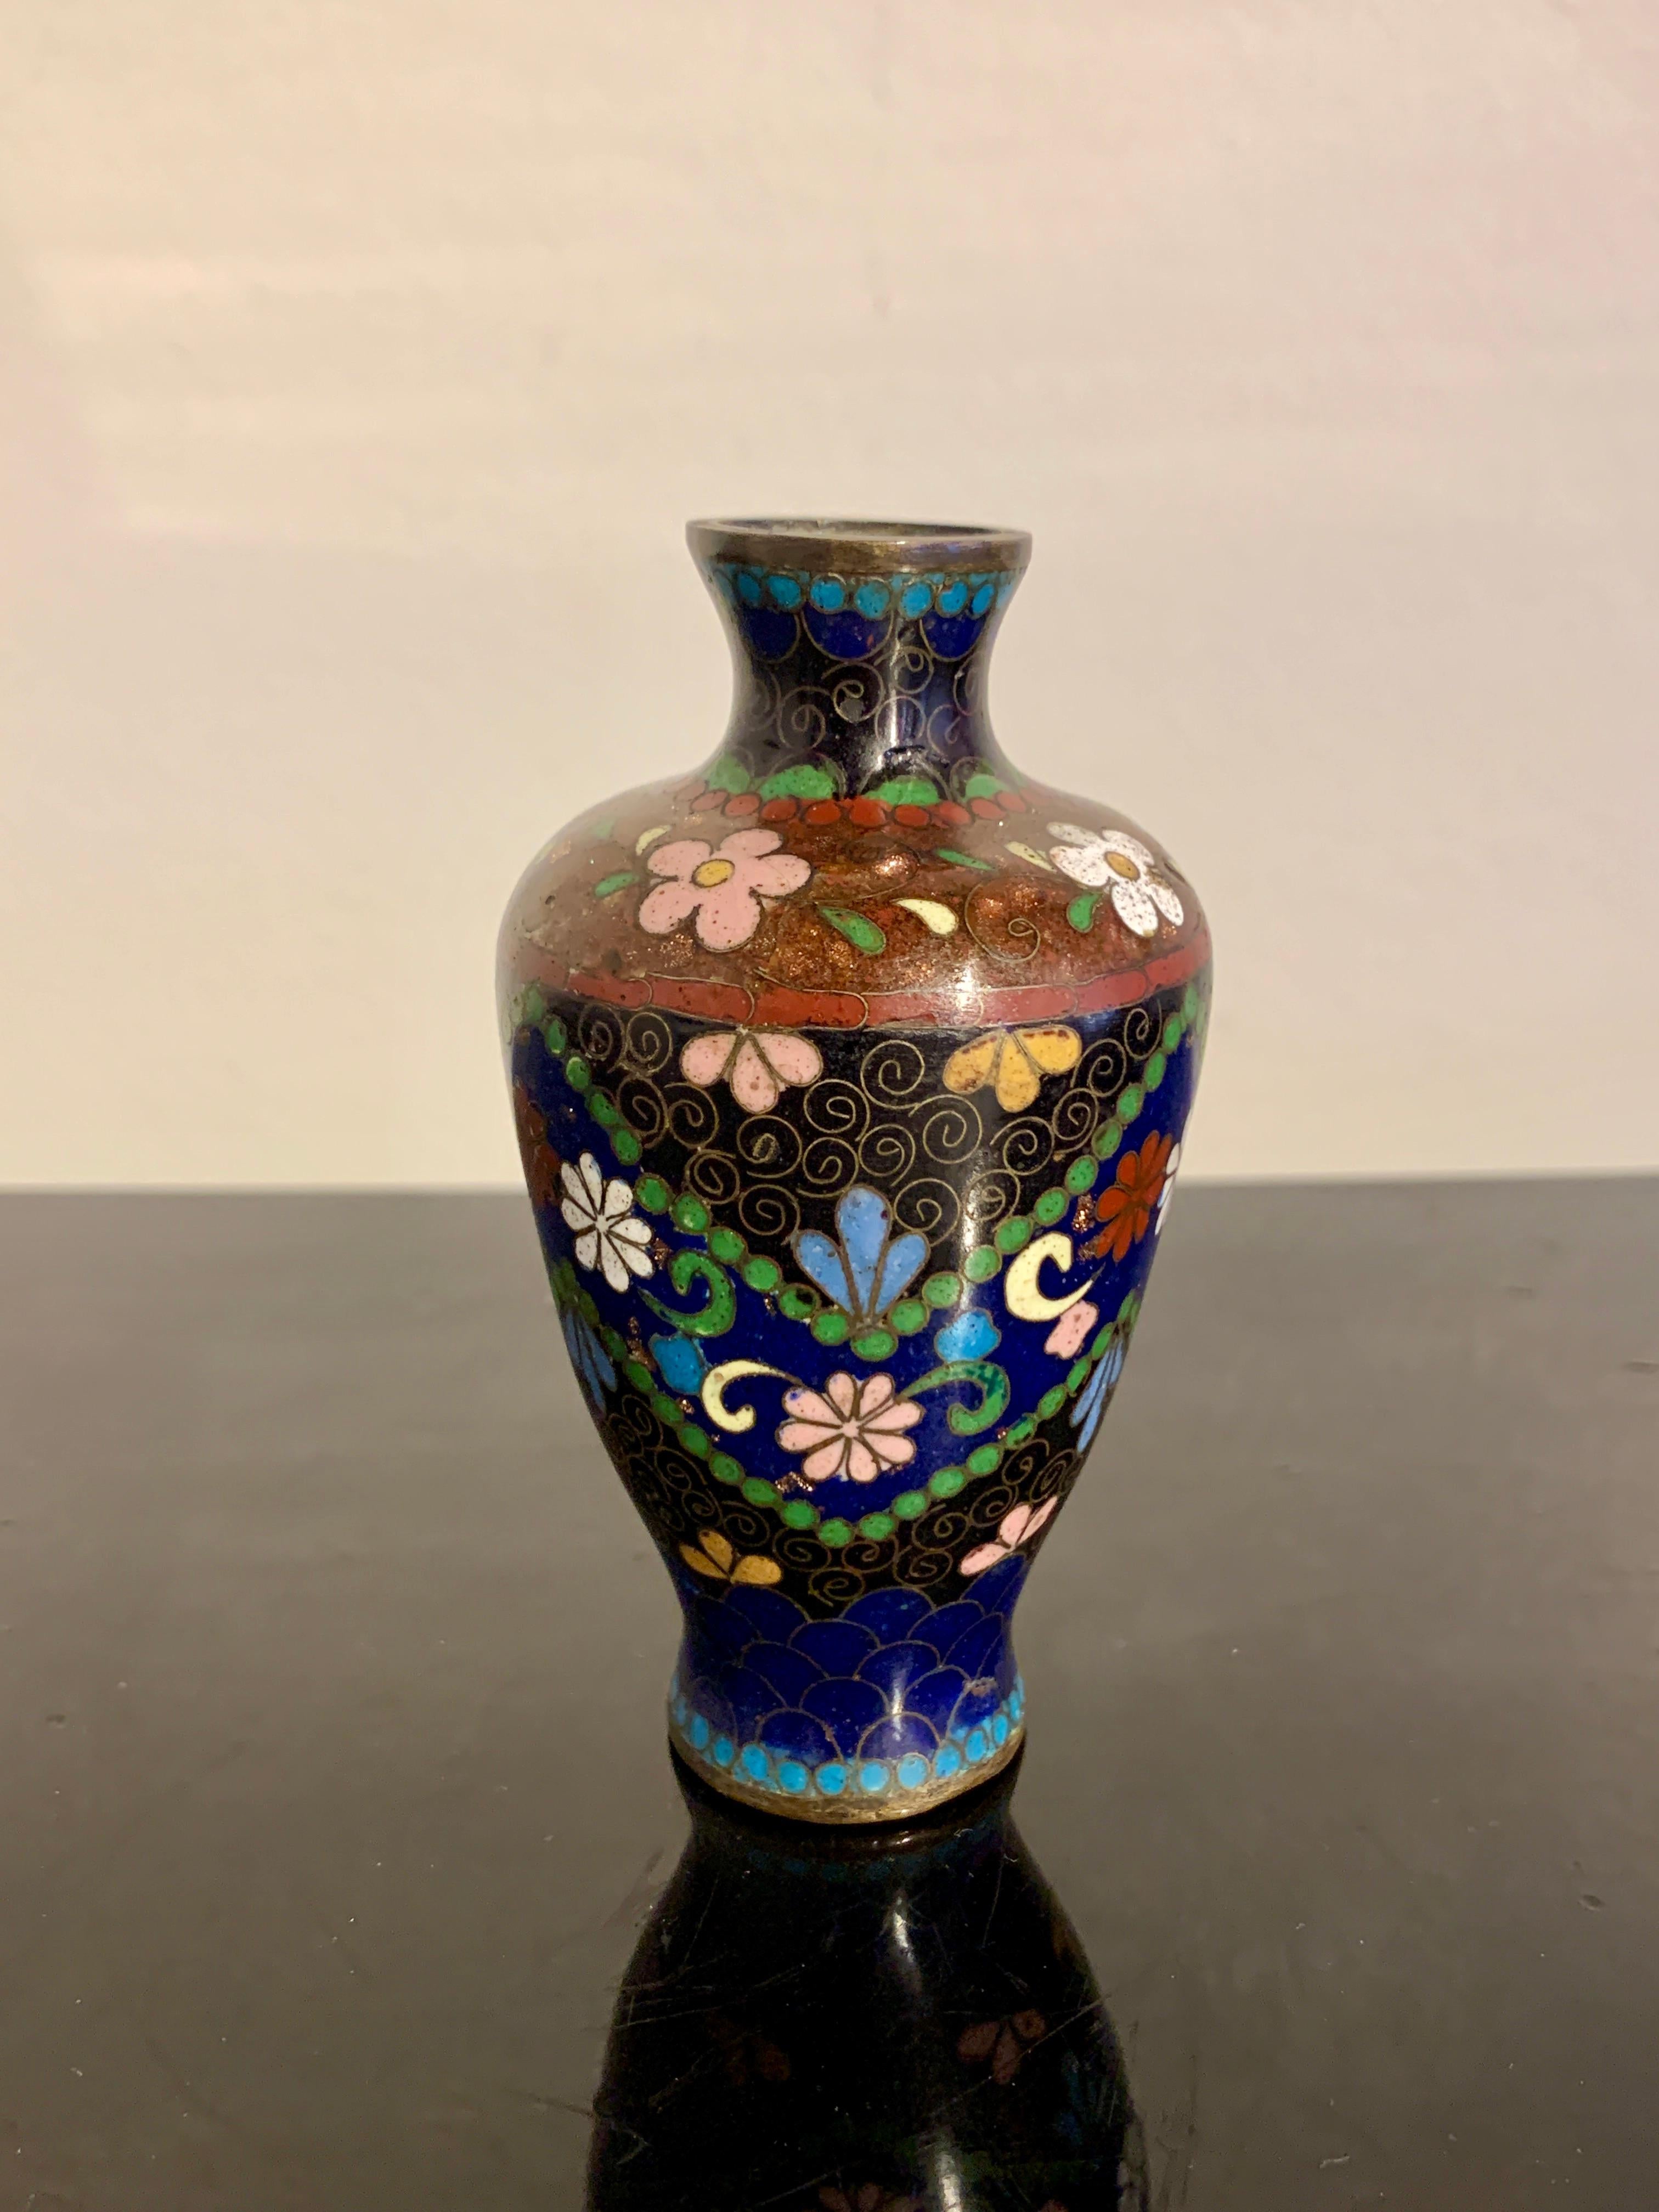 Group of Five Small Japanese Cloisonne Vases, Meiji Period, Early 20th C, Japan 3